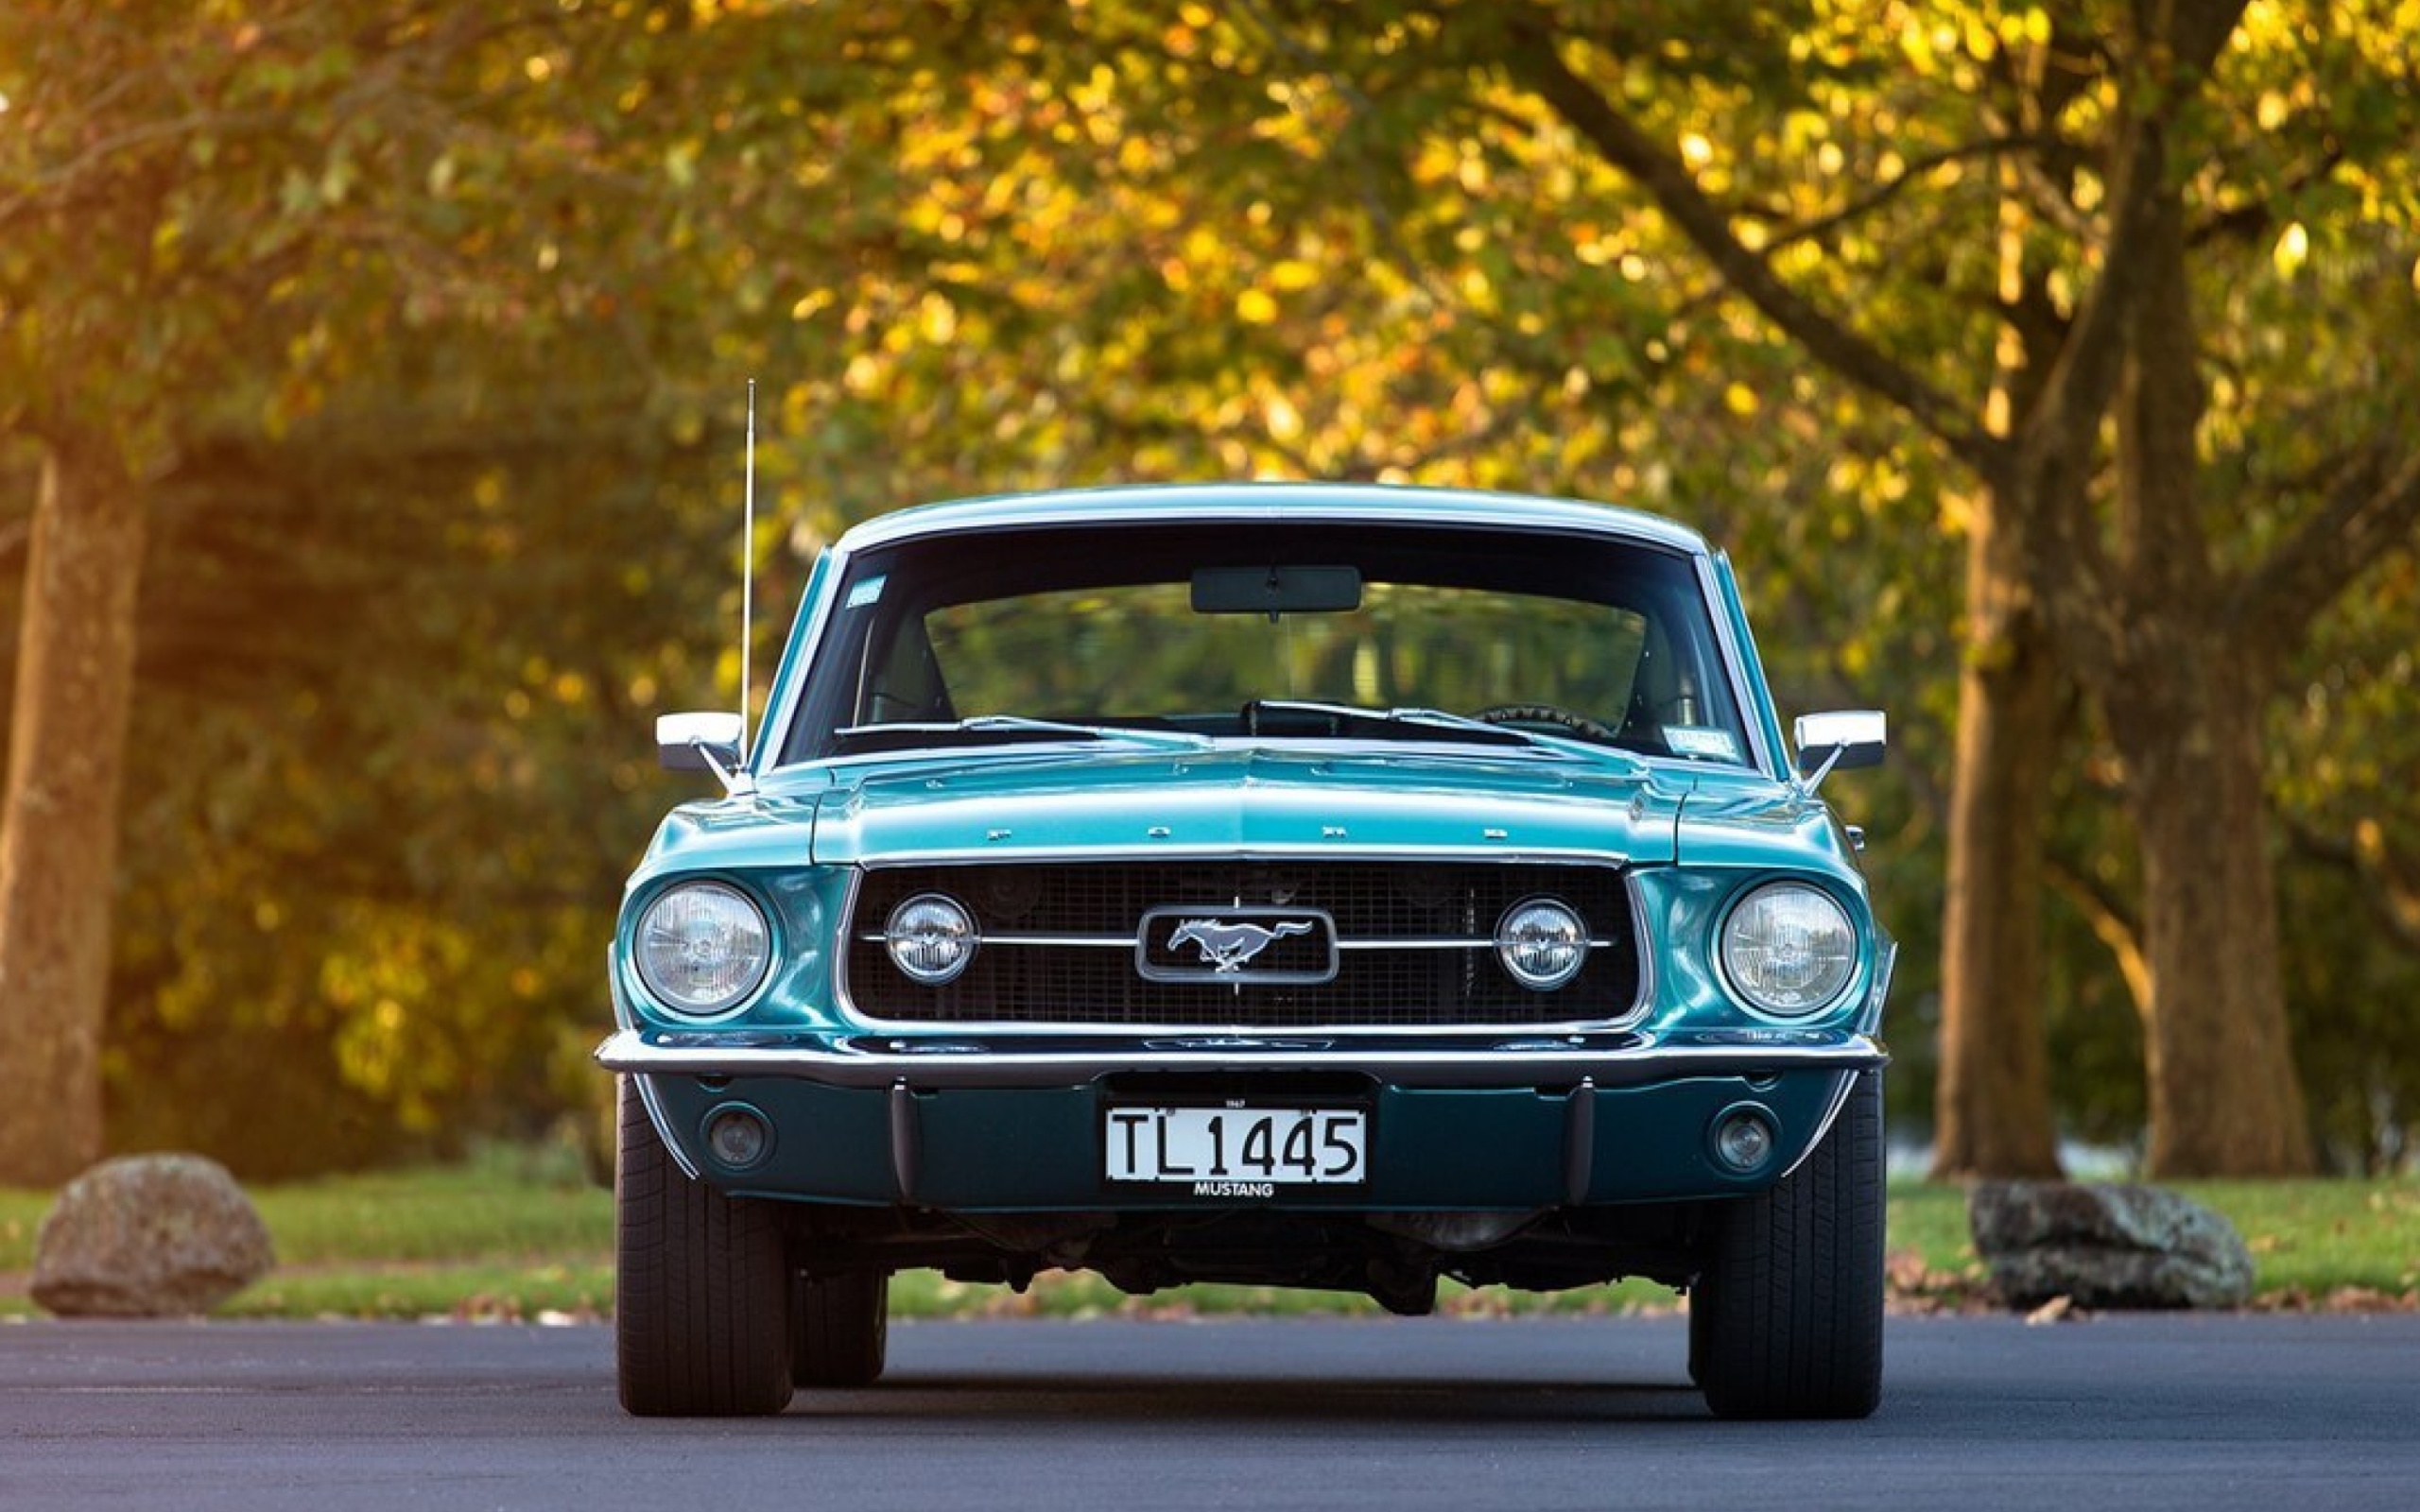 Ford Mustang First Generation wallpaper 2560x1600